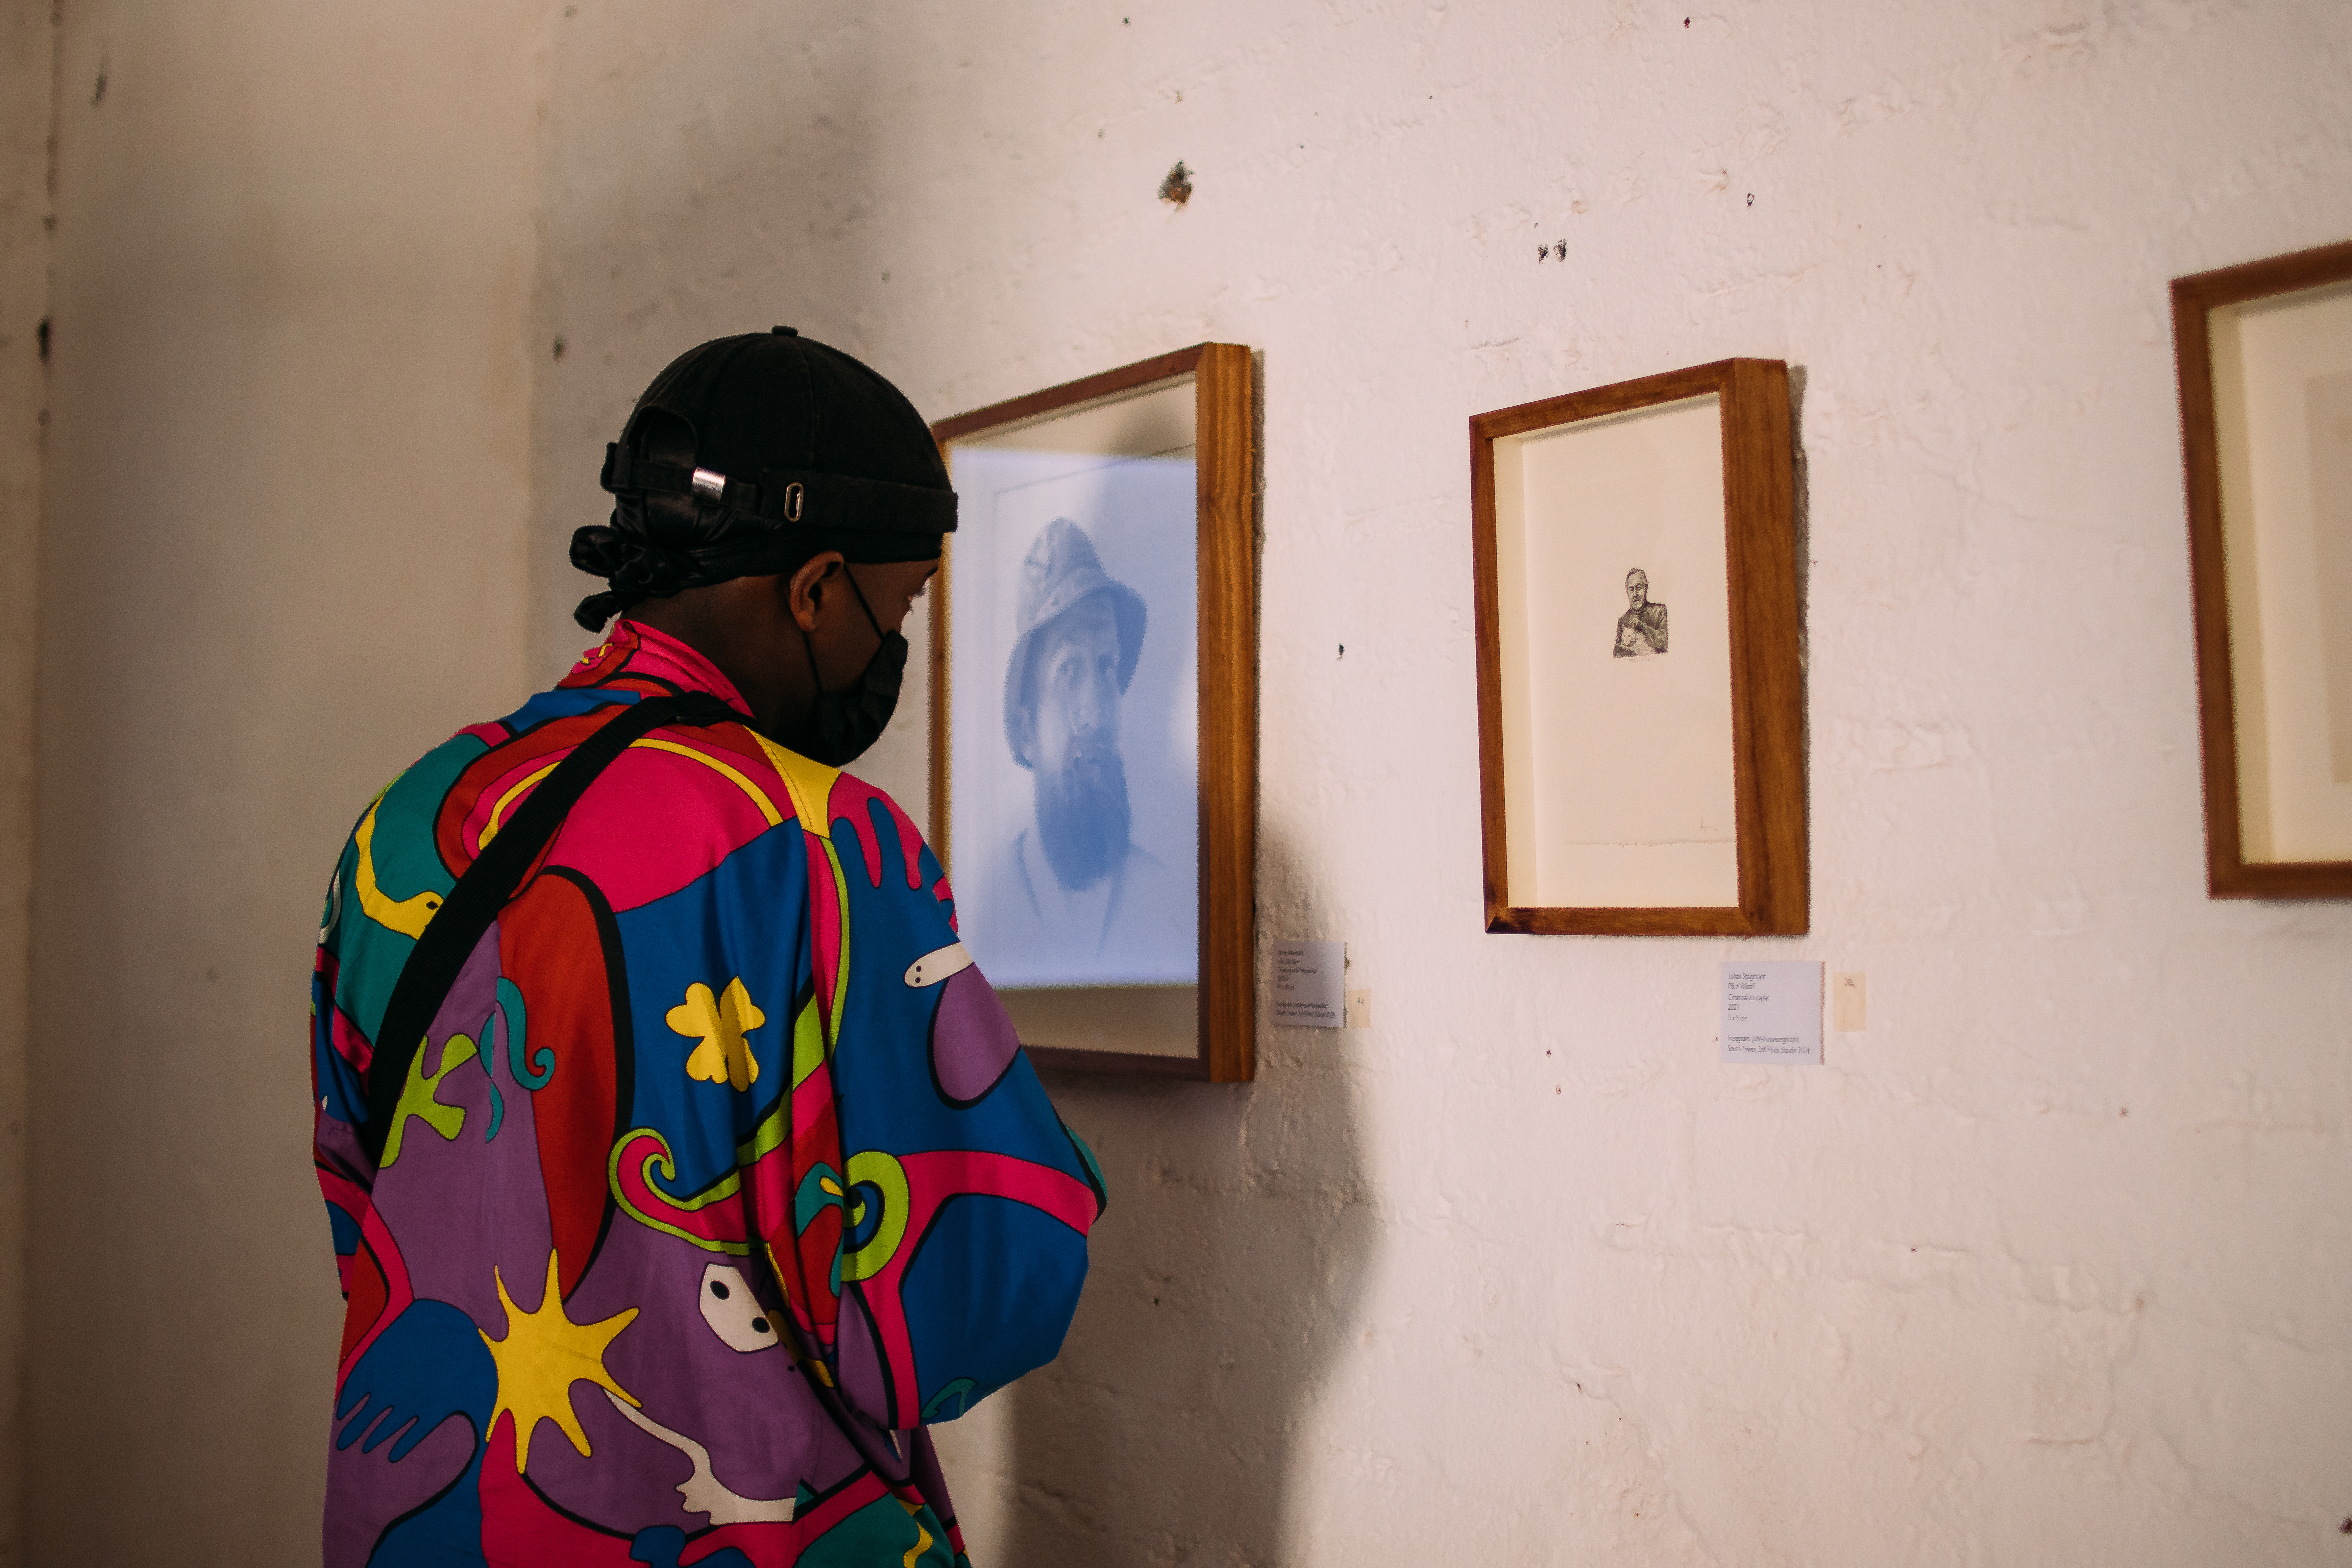 Visitor looking at Johan Stegmann’s artwork, as part of a group exhibition entitled “Broken Telephone”, curated by Olwethu de Vos. Image: Marc Hervé